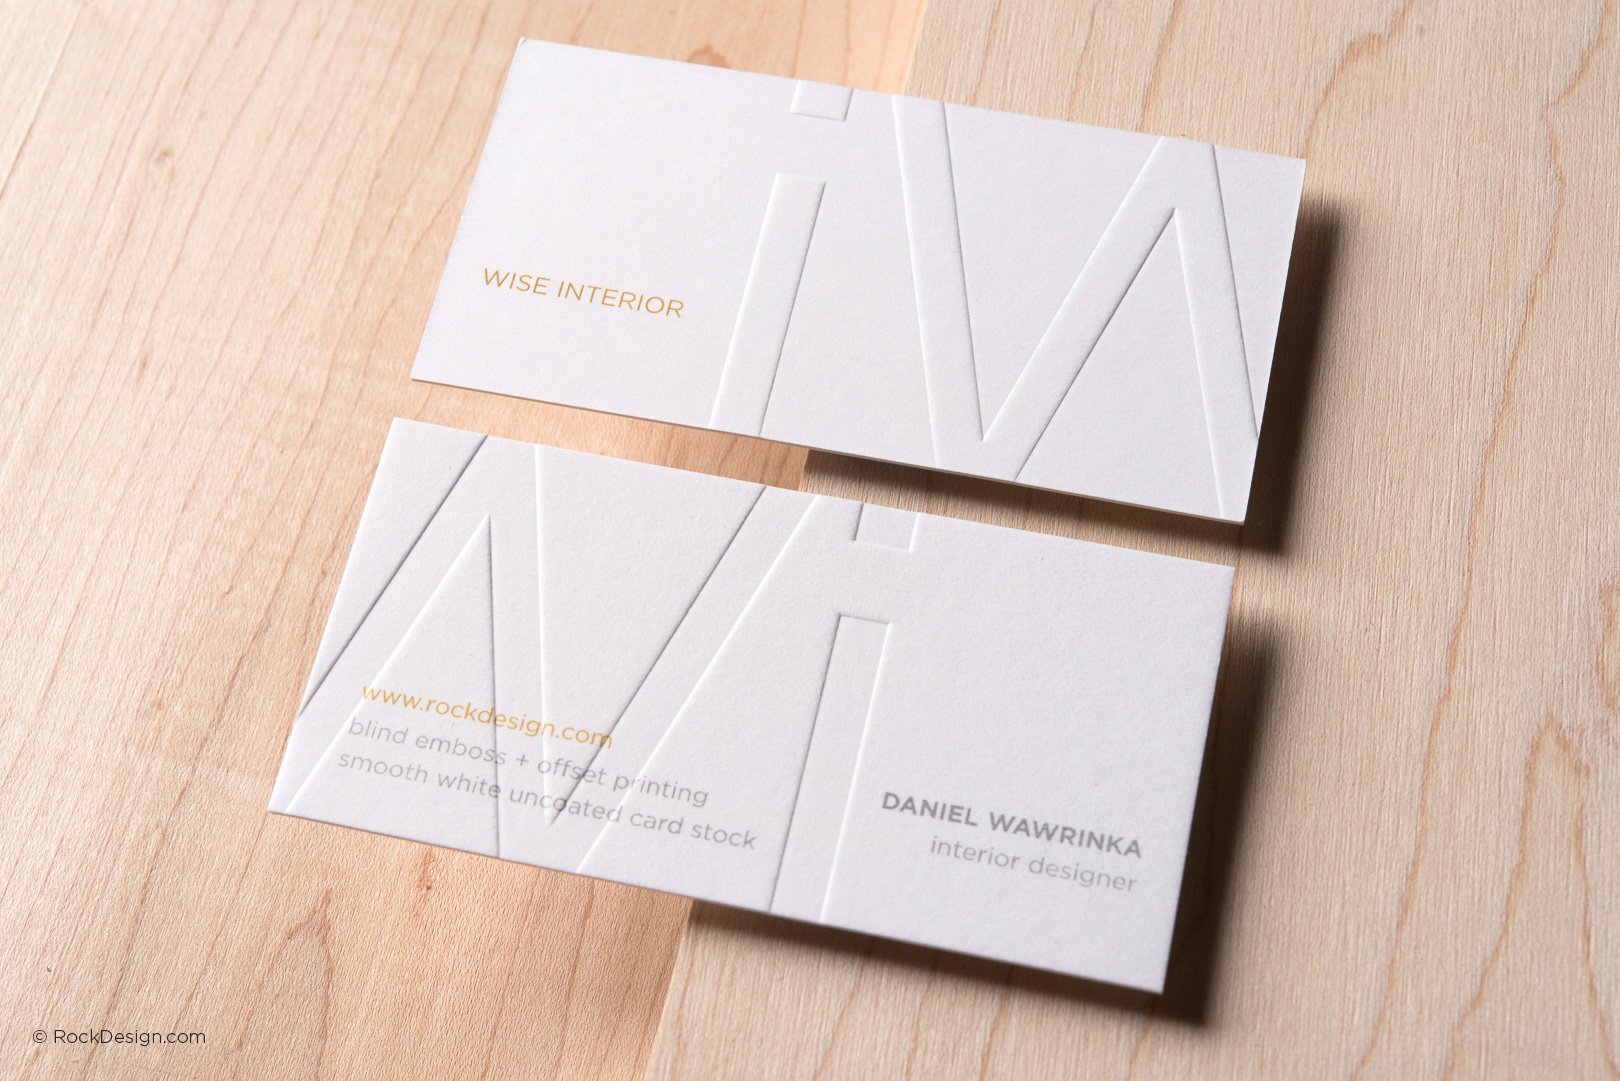 EXPLORE cool logo and card designs